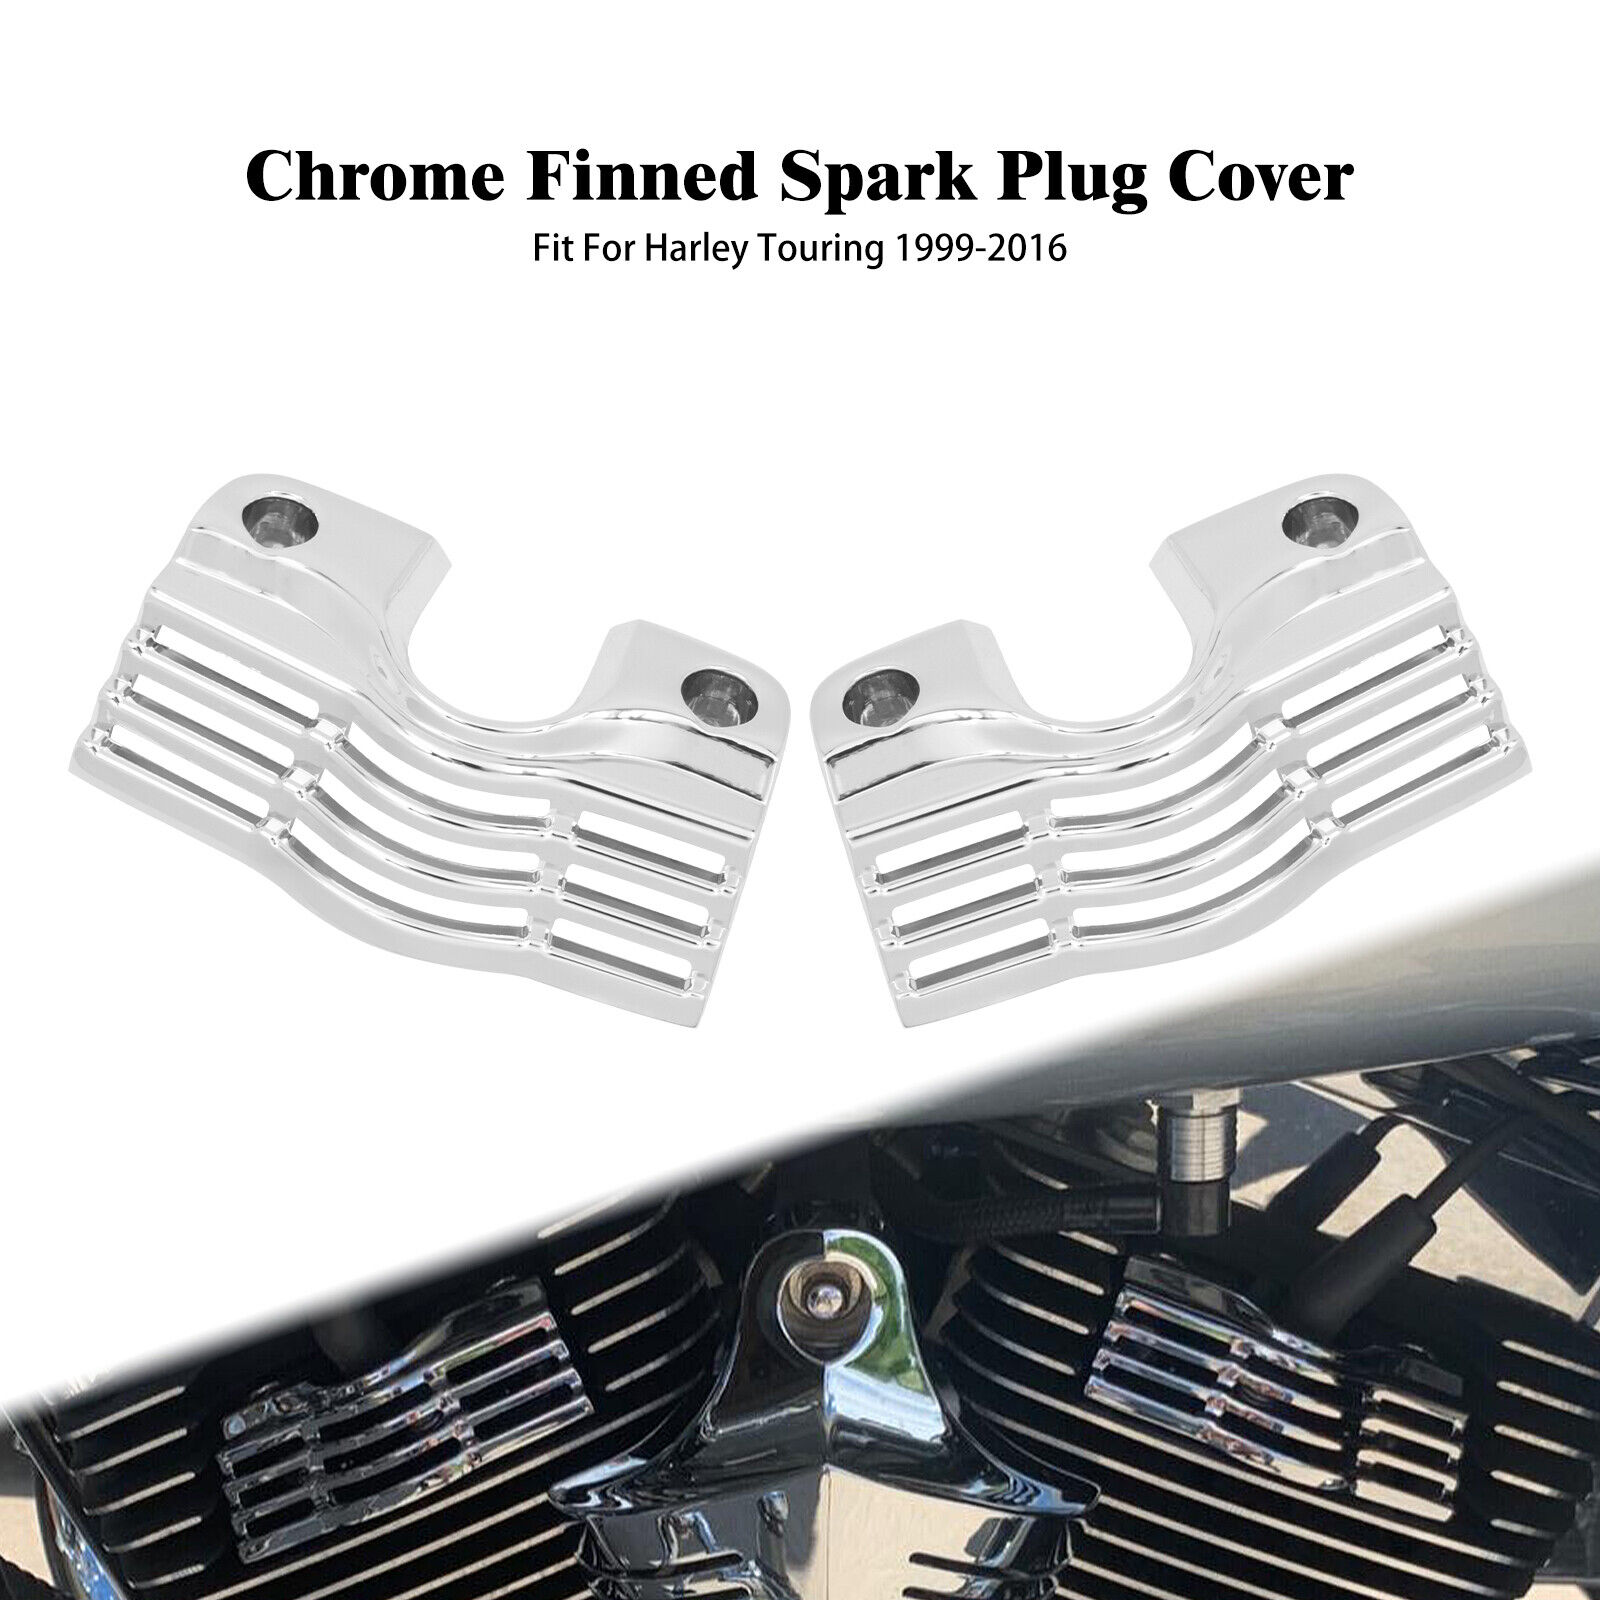 Chrome Finned Head Bolt Spark Plug Cover Fit For Harley 99-2016 Twin Cam Models